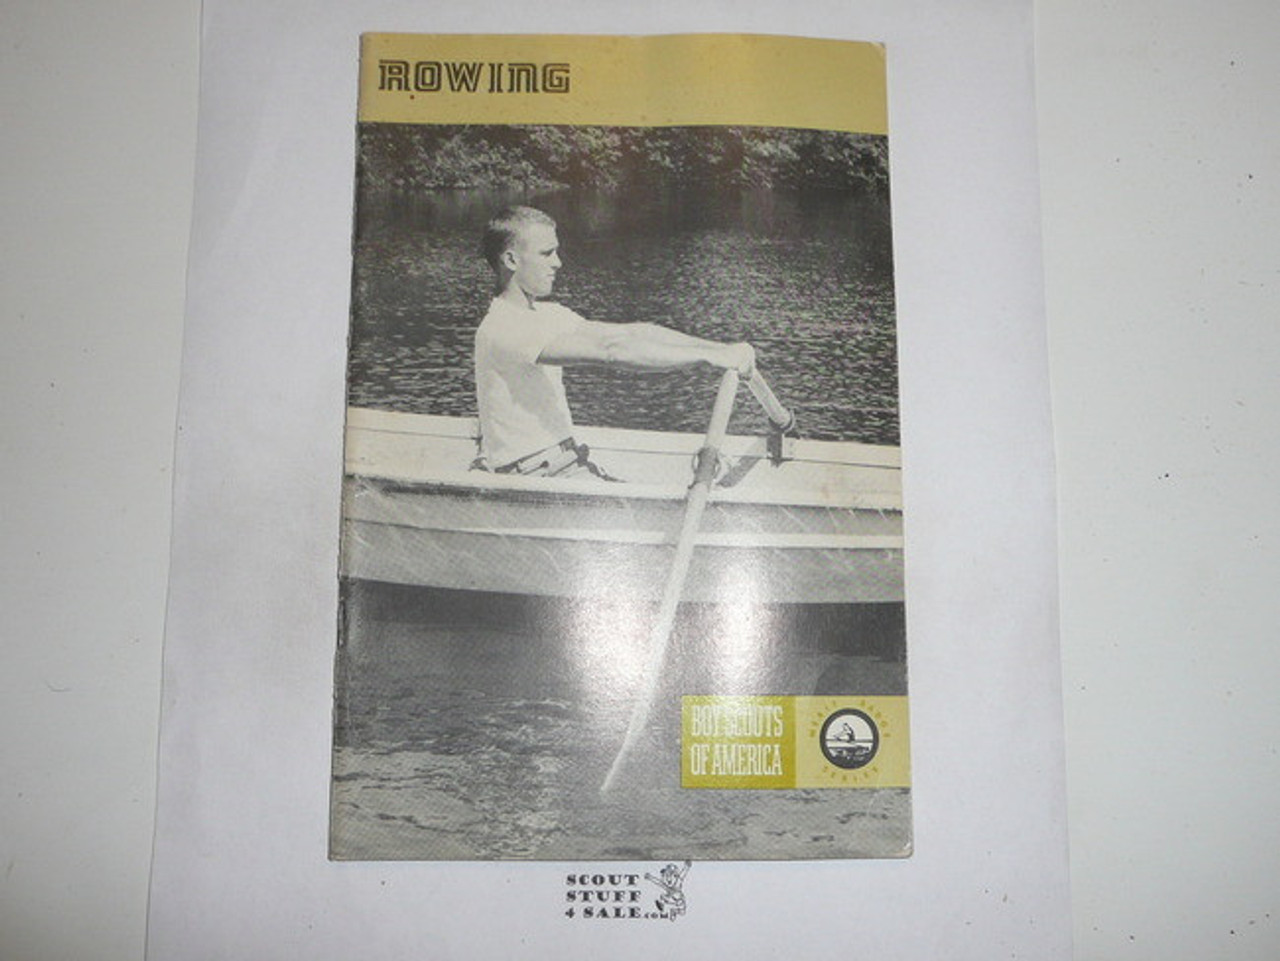 Rowing Merit Badge Pamphlet, Type 8, Green Band Cover, 1-75 Printing